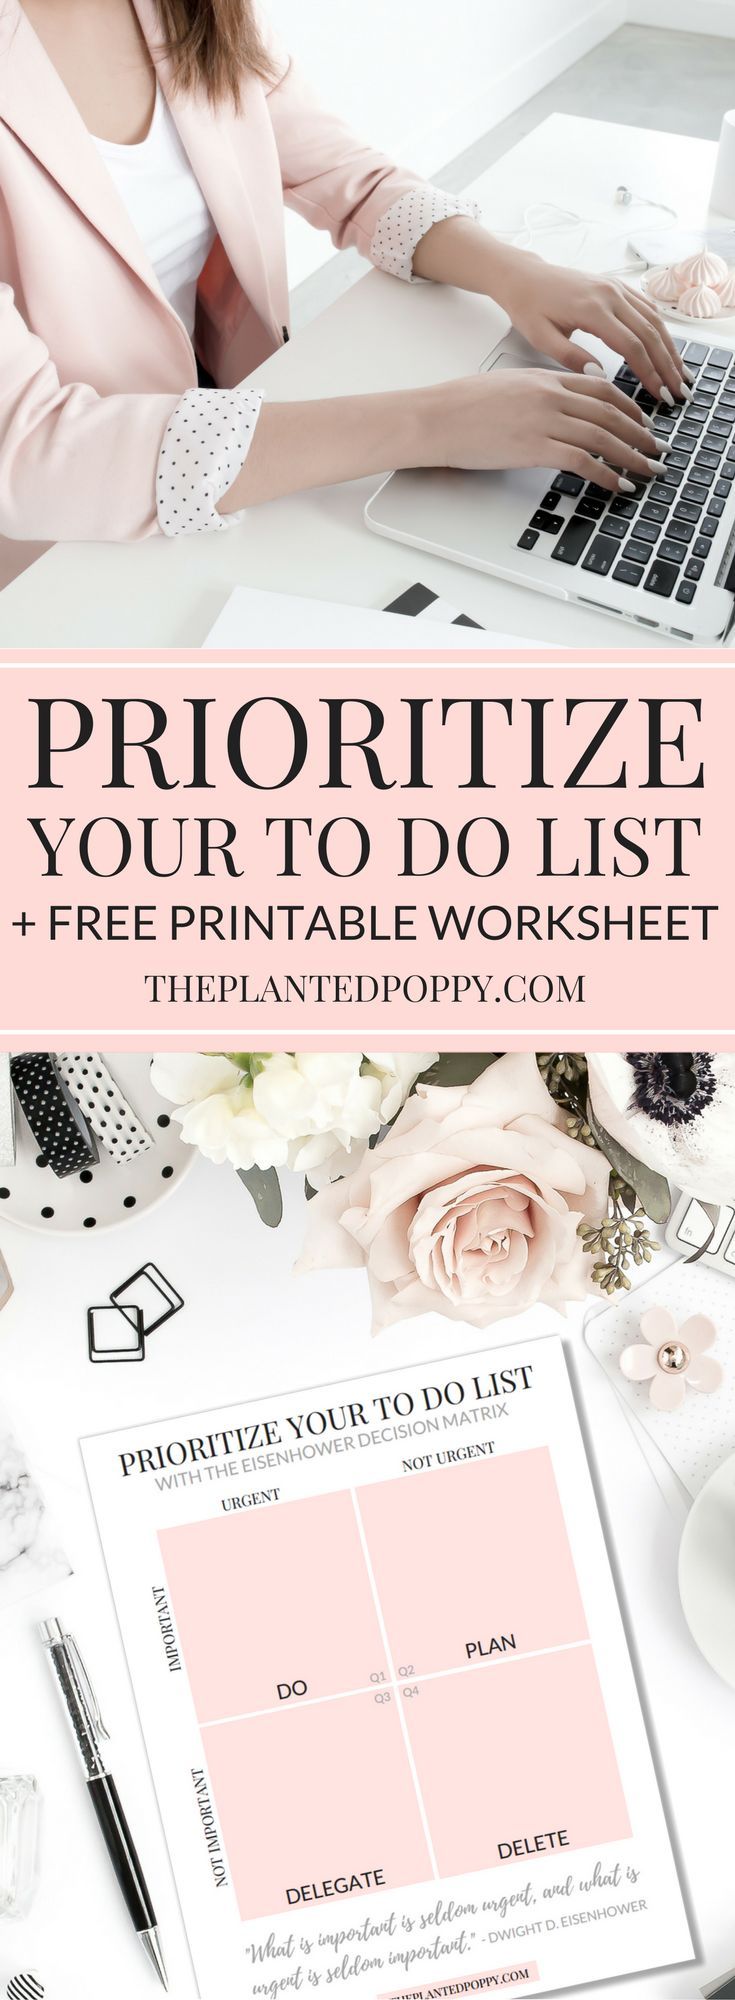 How to Prioritize Your To Do List + Free Printable Worksheet - The